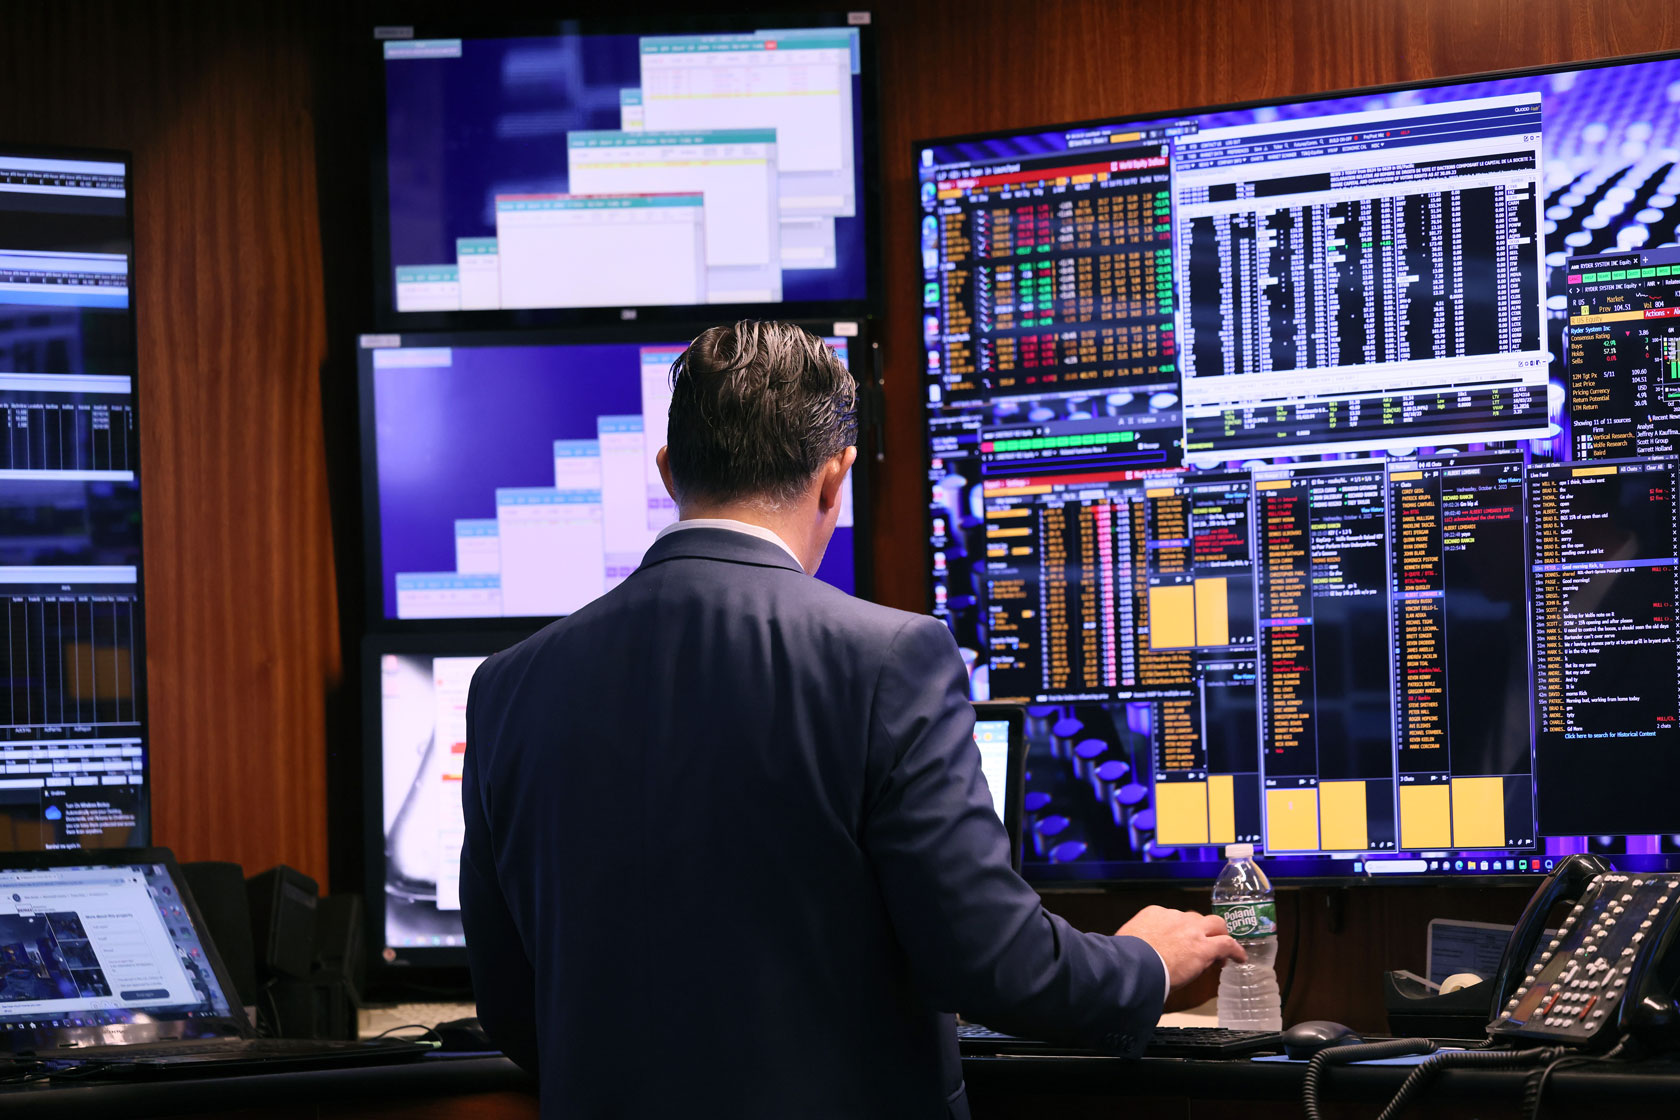 A man stands in front of multiple computer screens displaying stocks.